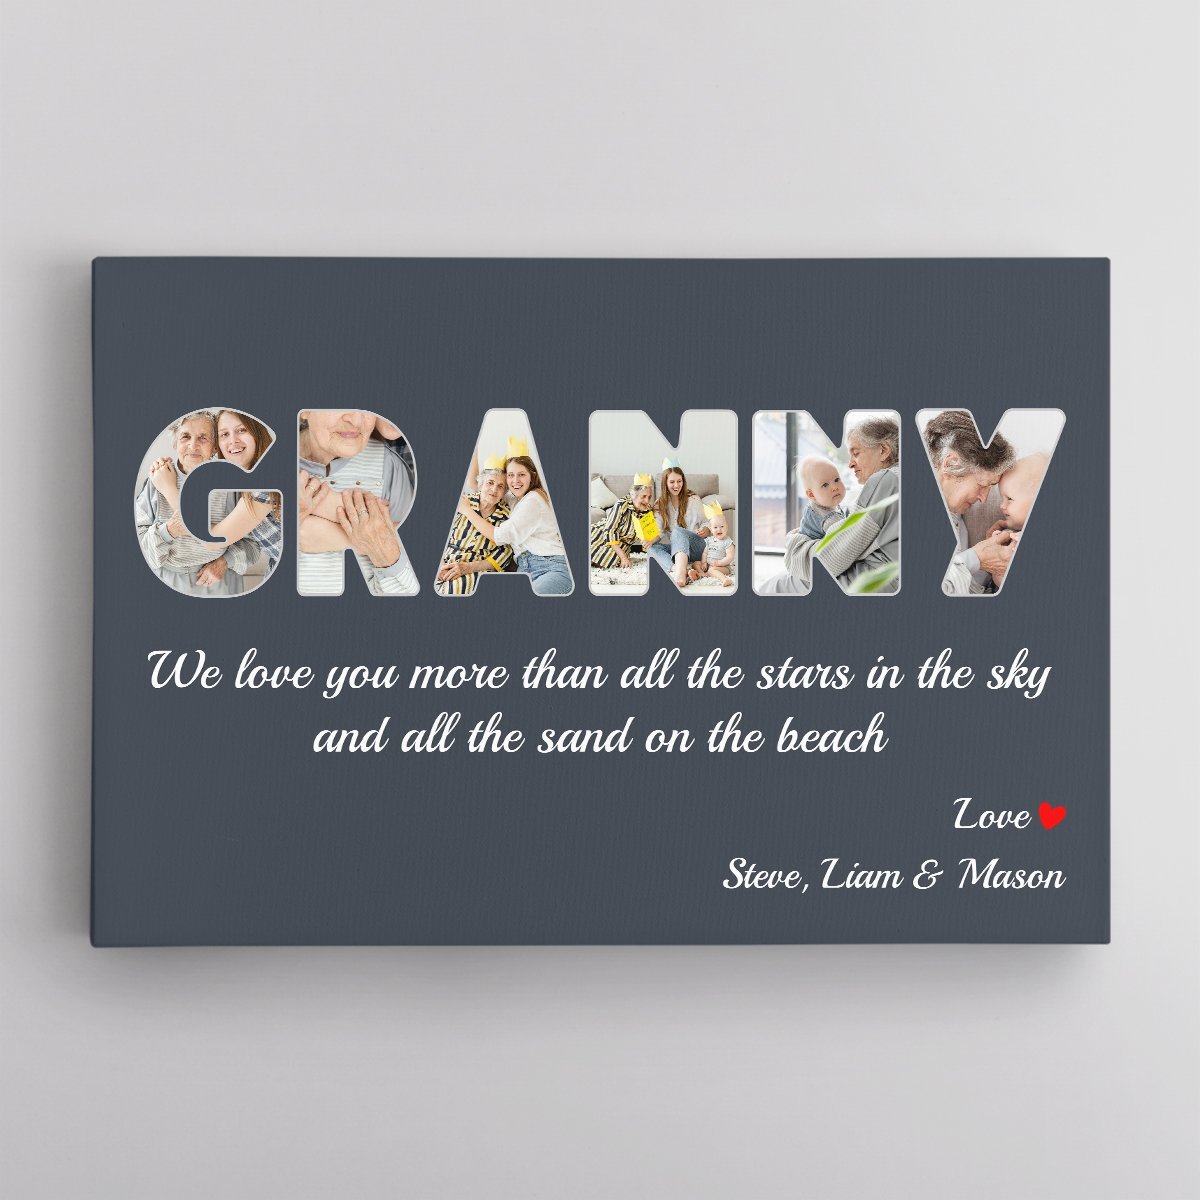 Granny Custom Photo - Personalized Name And Text Canvas Wall Art